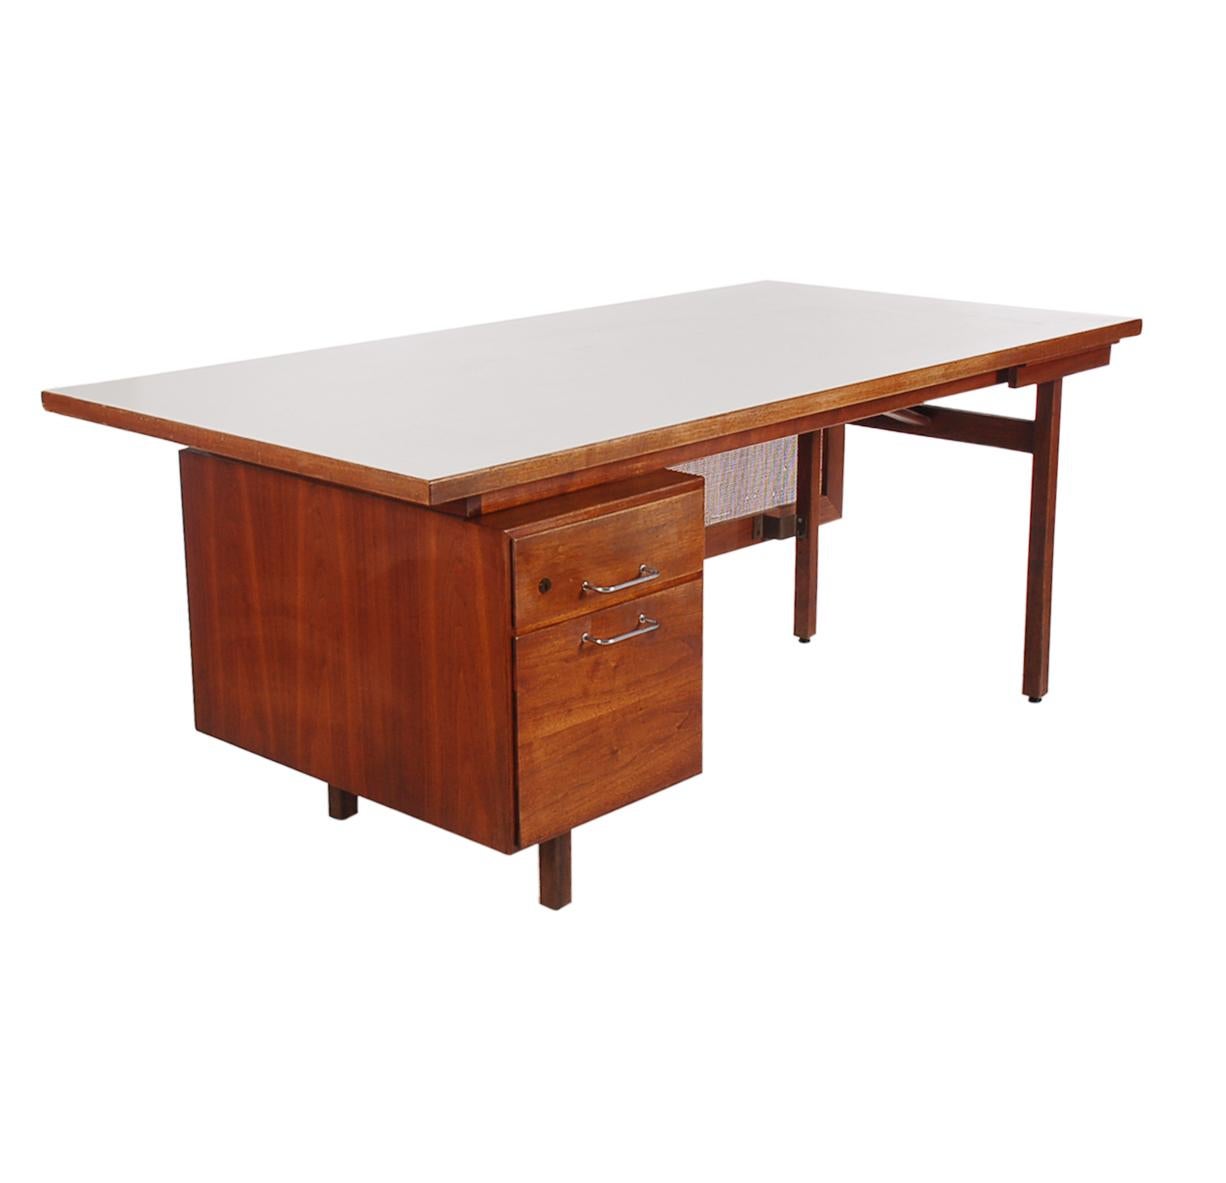 A substantial and sophisticated looking design by Jens Risom circa 1960s. This desk features solid walnut construction, white laminate top, and a floating front cane panel. In very clean condition and ready for immediate use.